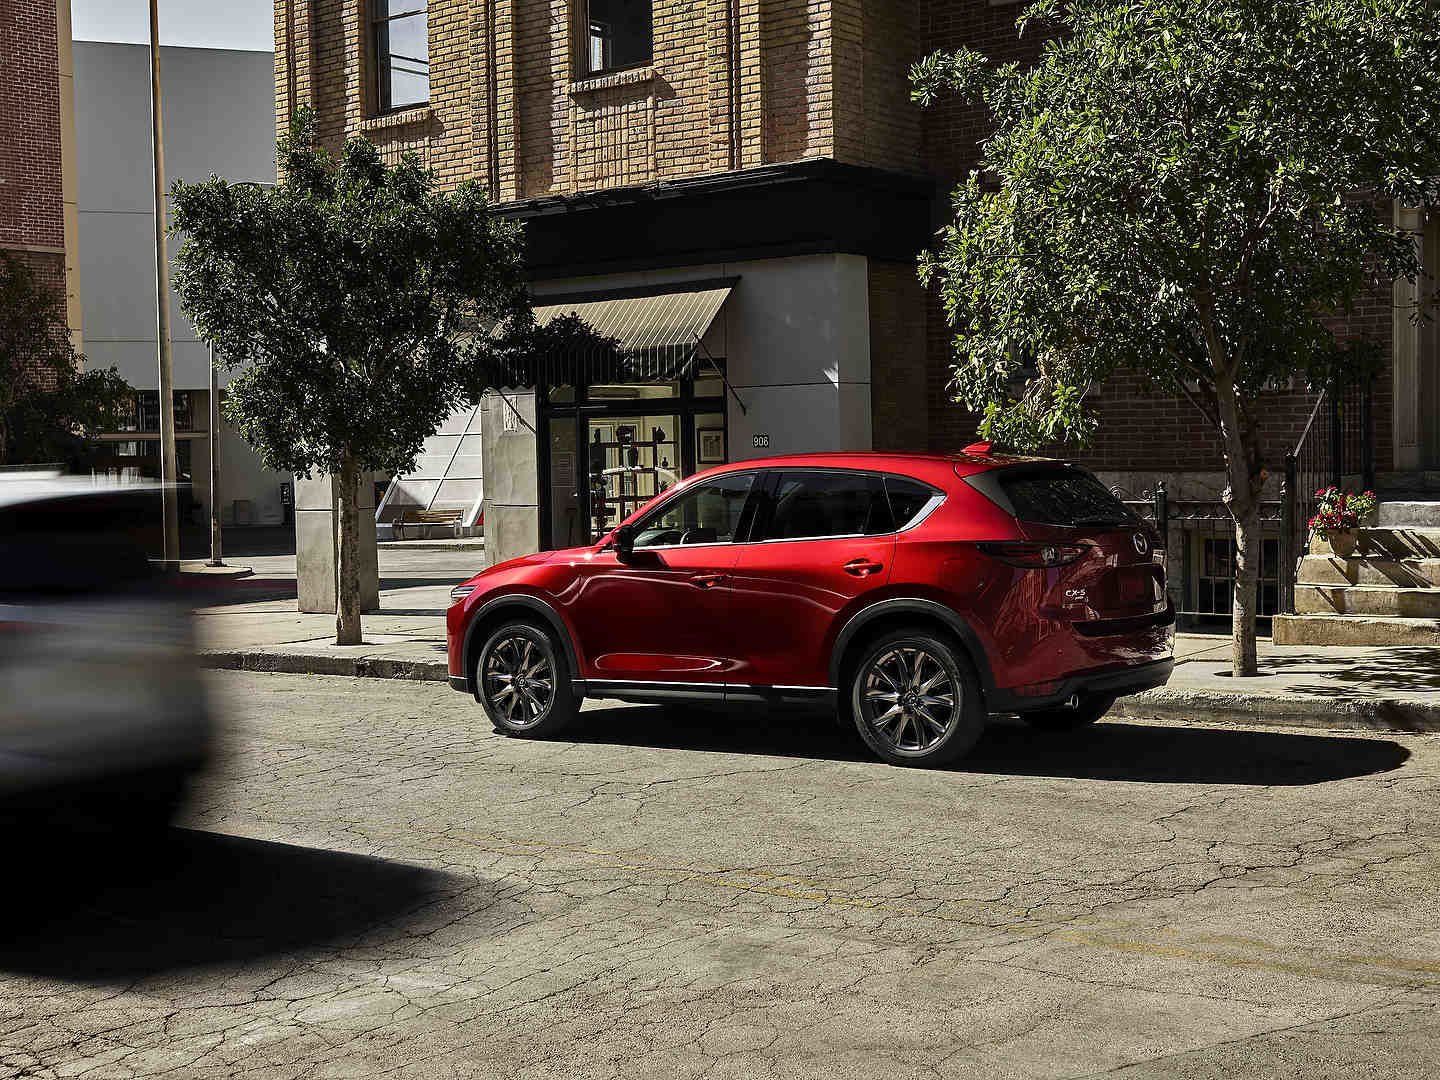 2021 Mazda CX-5 vs. 2021 Nissan Rogue: A Much More Enjoyable Drive